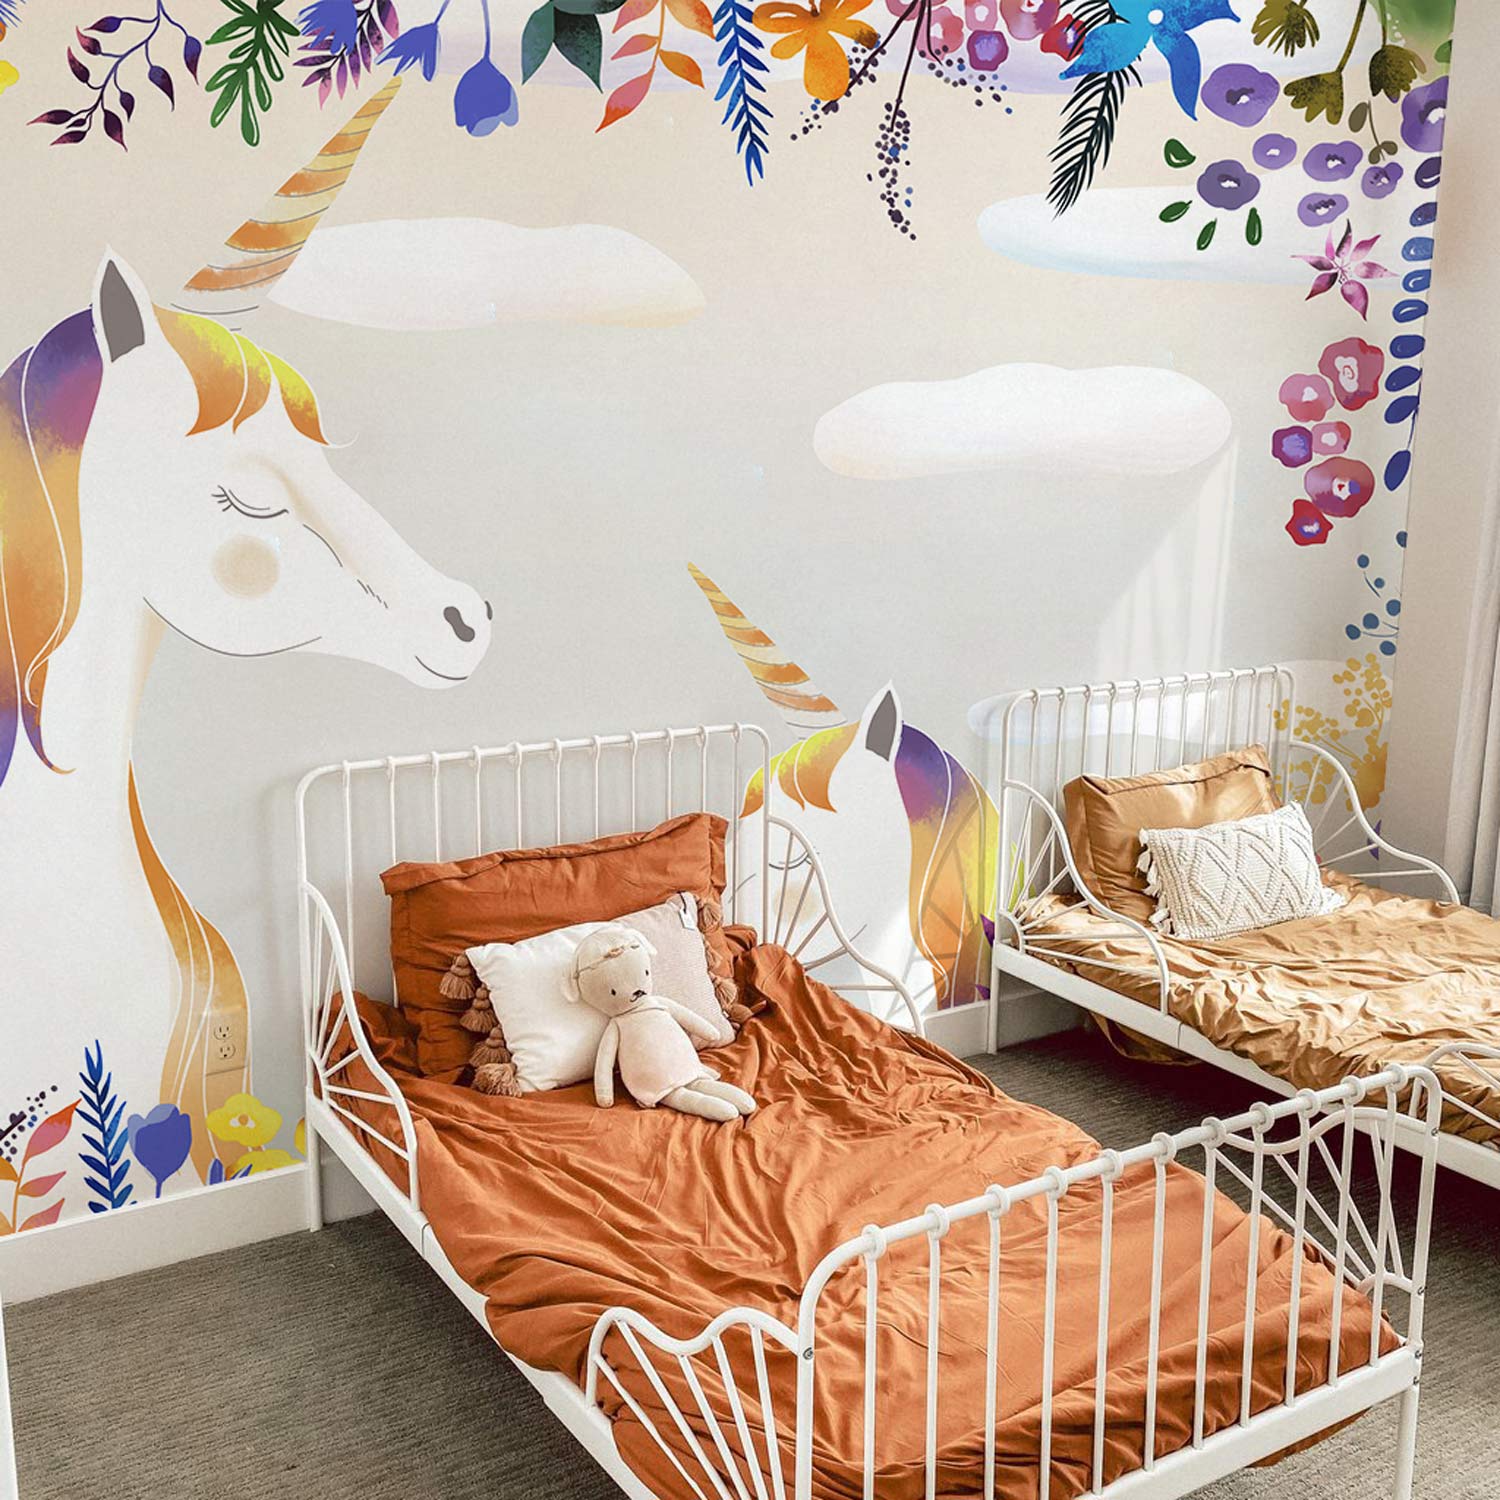 Unicorns and other Animals Decorated on a Wall Mural Wallpaper for Bedrooms